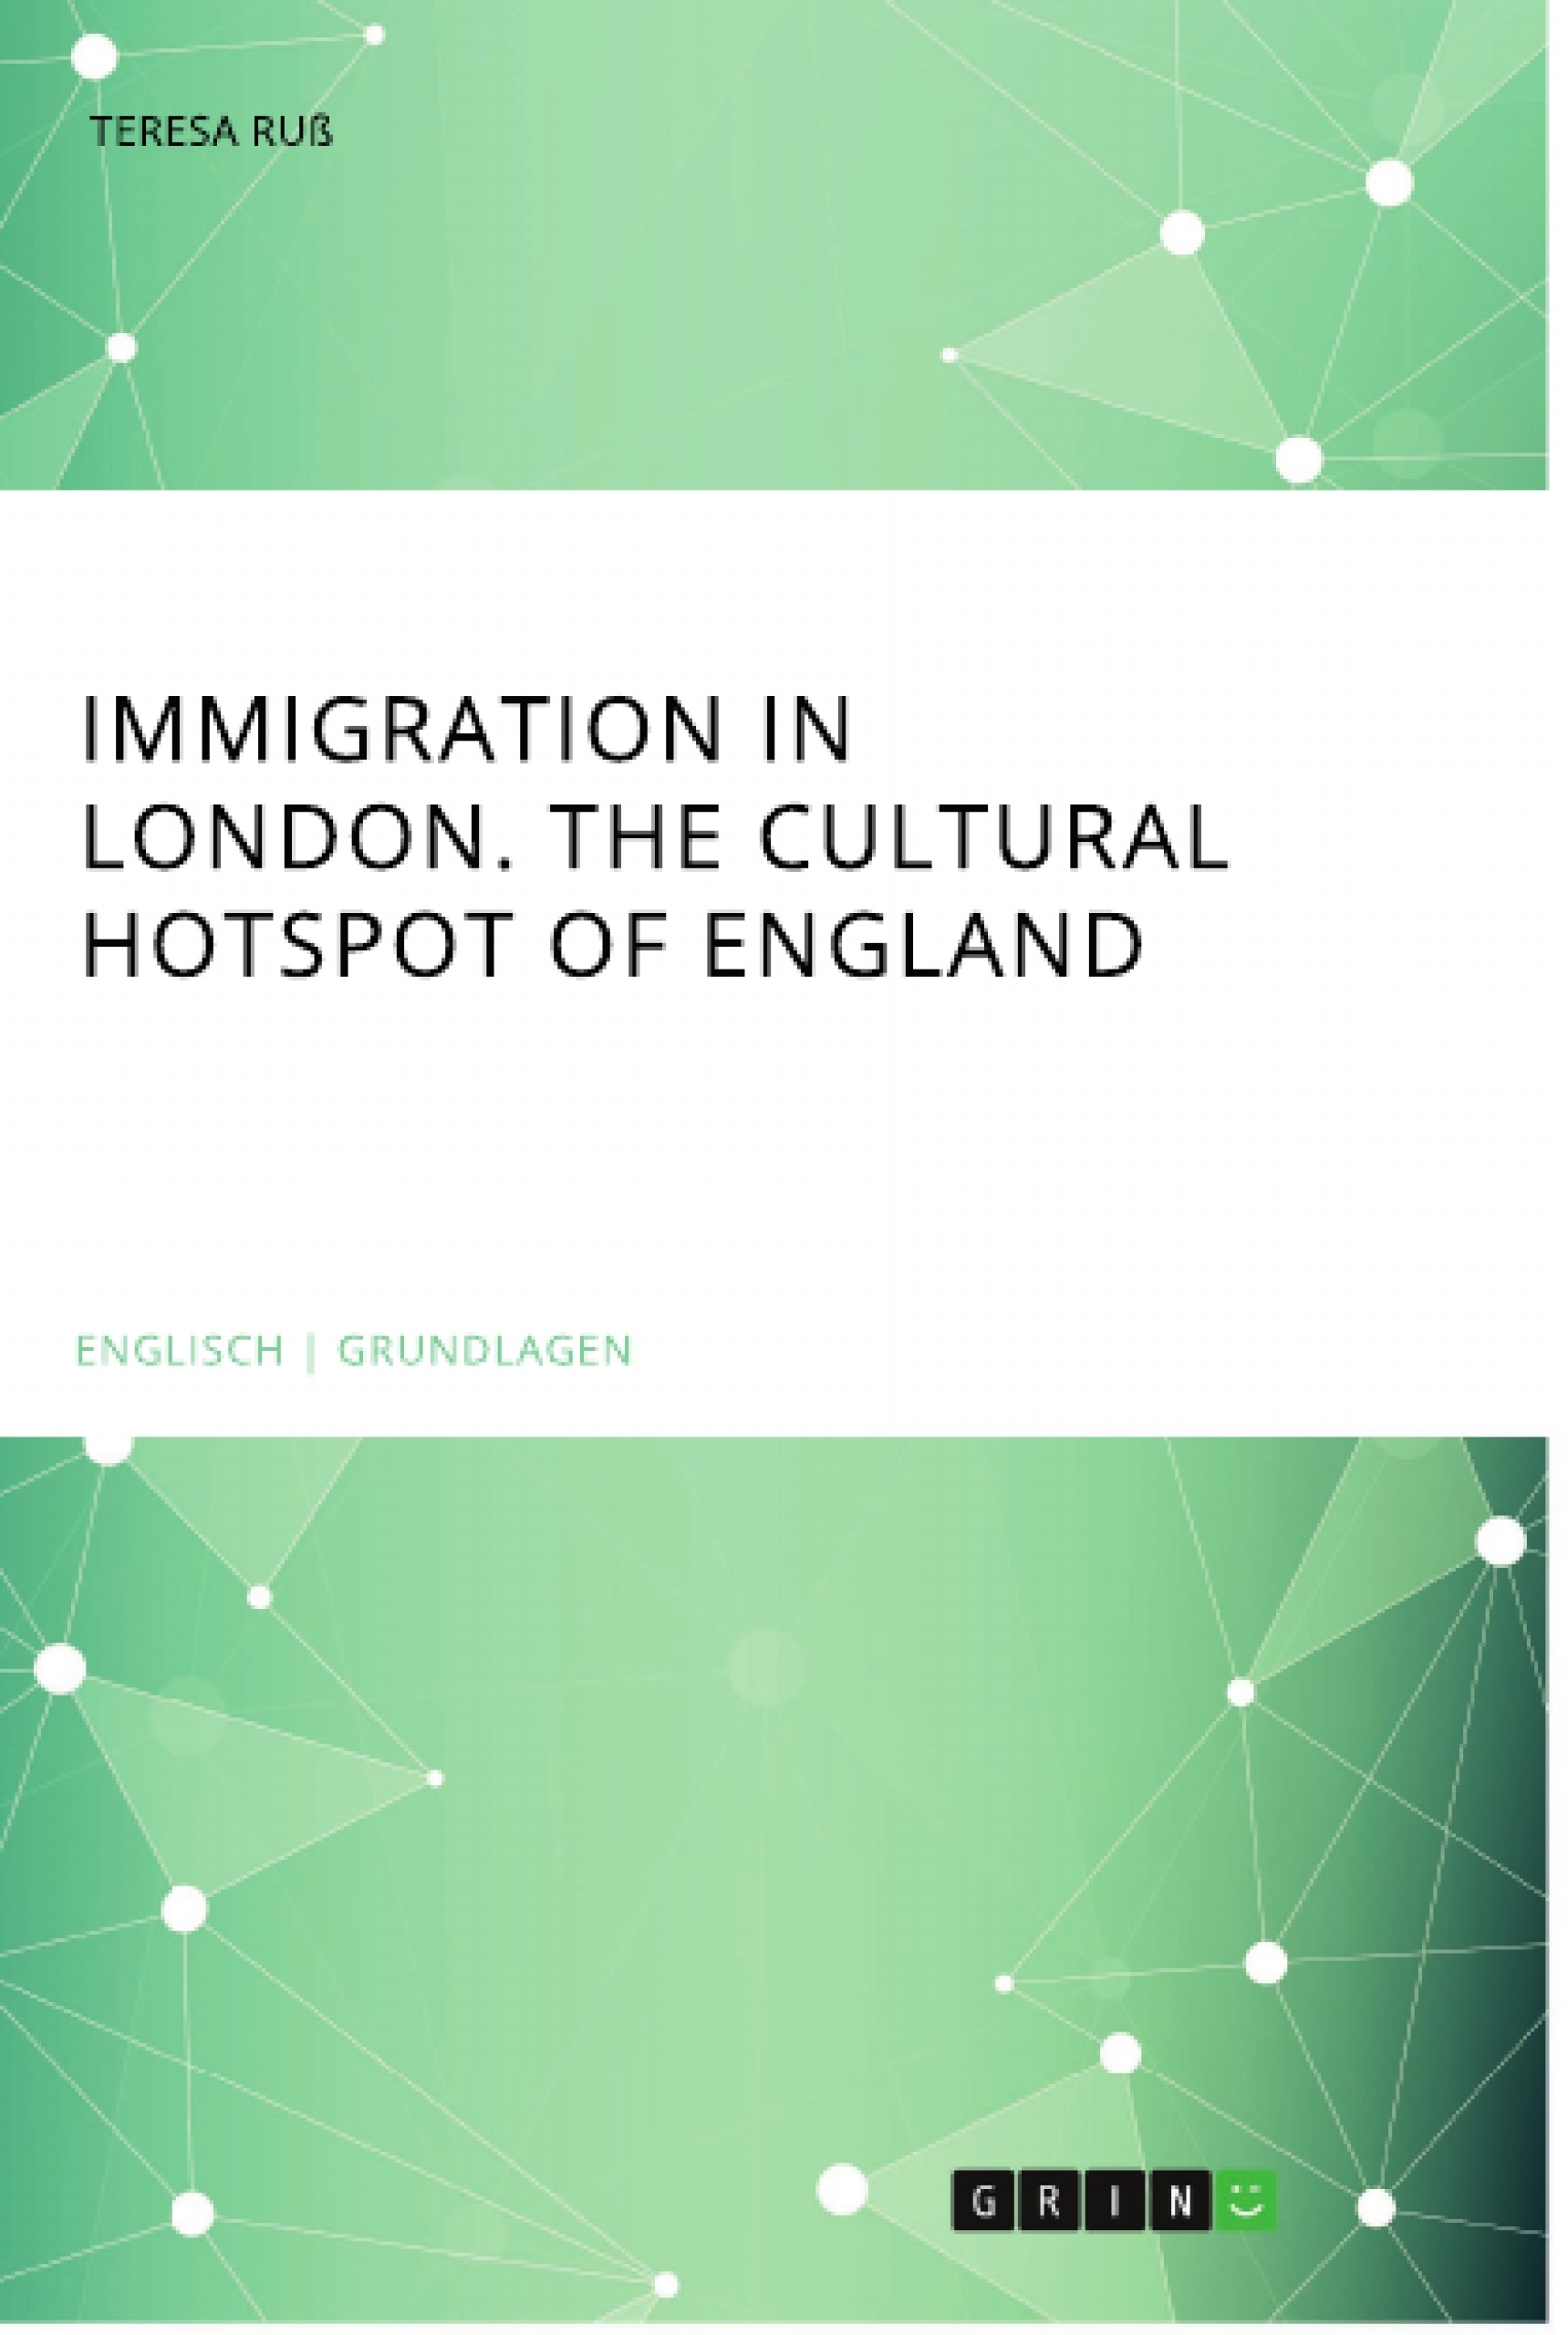 Title: Immigration in London. The cultural Hotspot of England